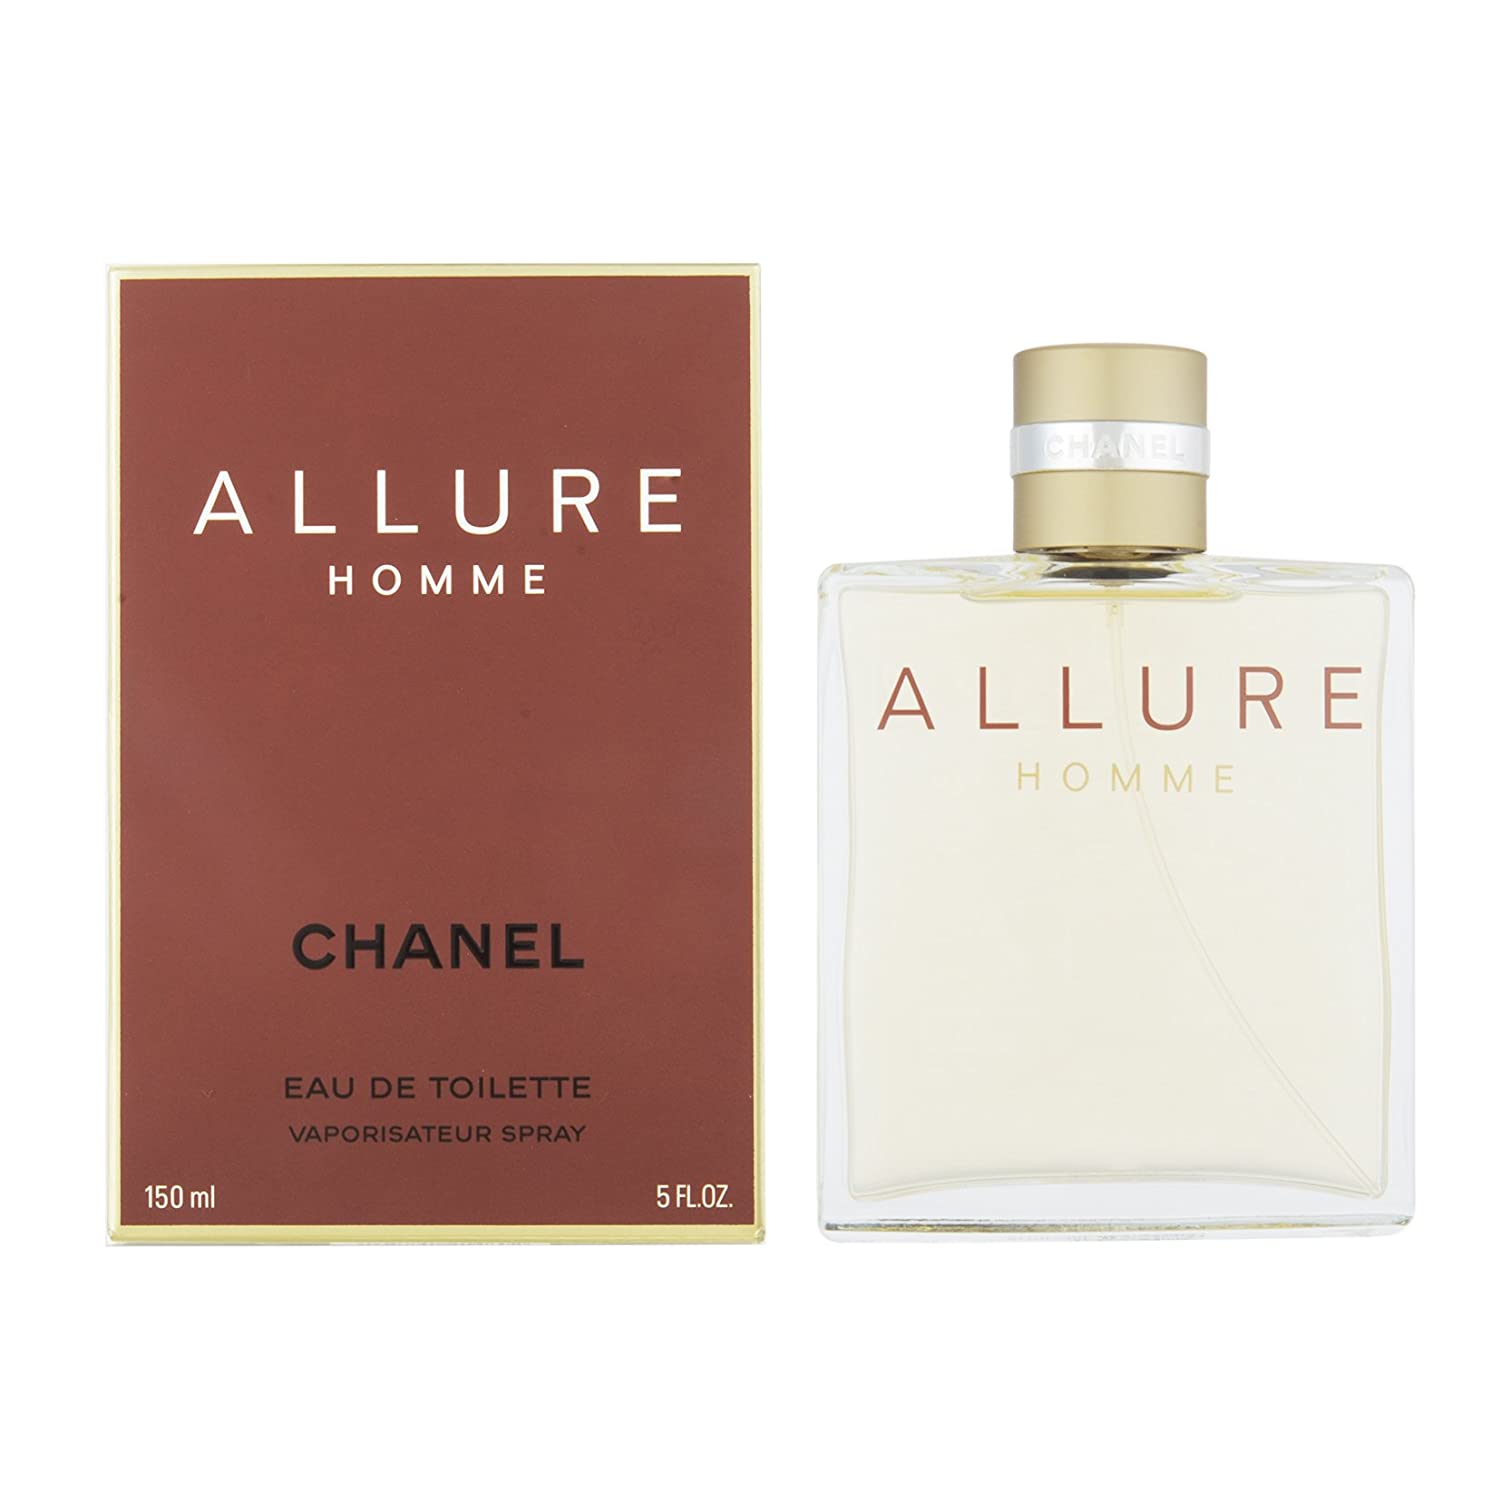 Allure Men Edt Homme The Perfume 150Ml For Chanel 24 Beauty –